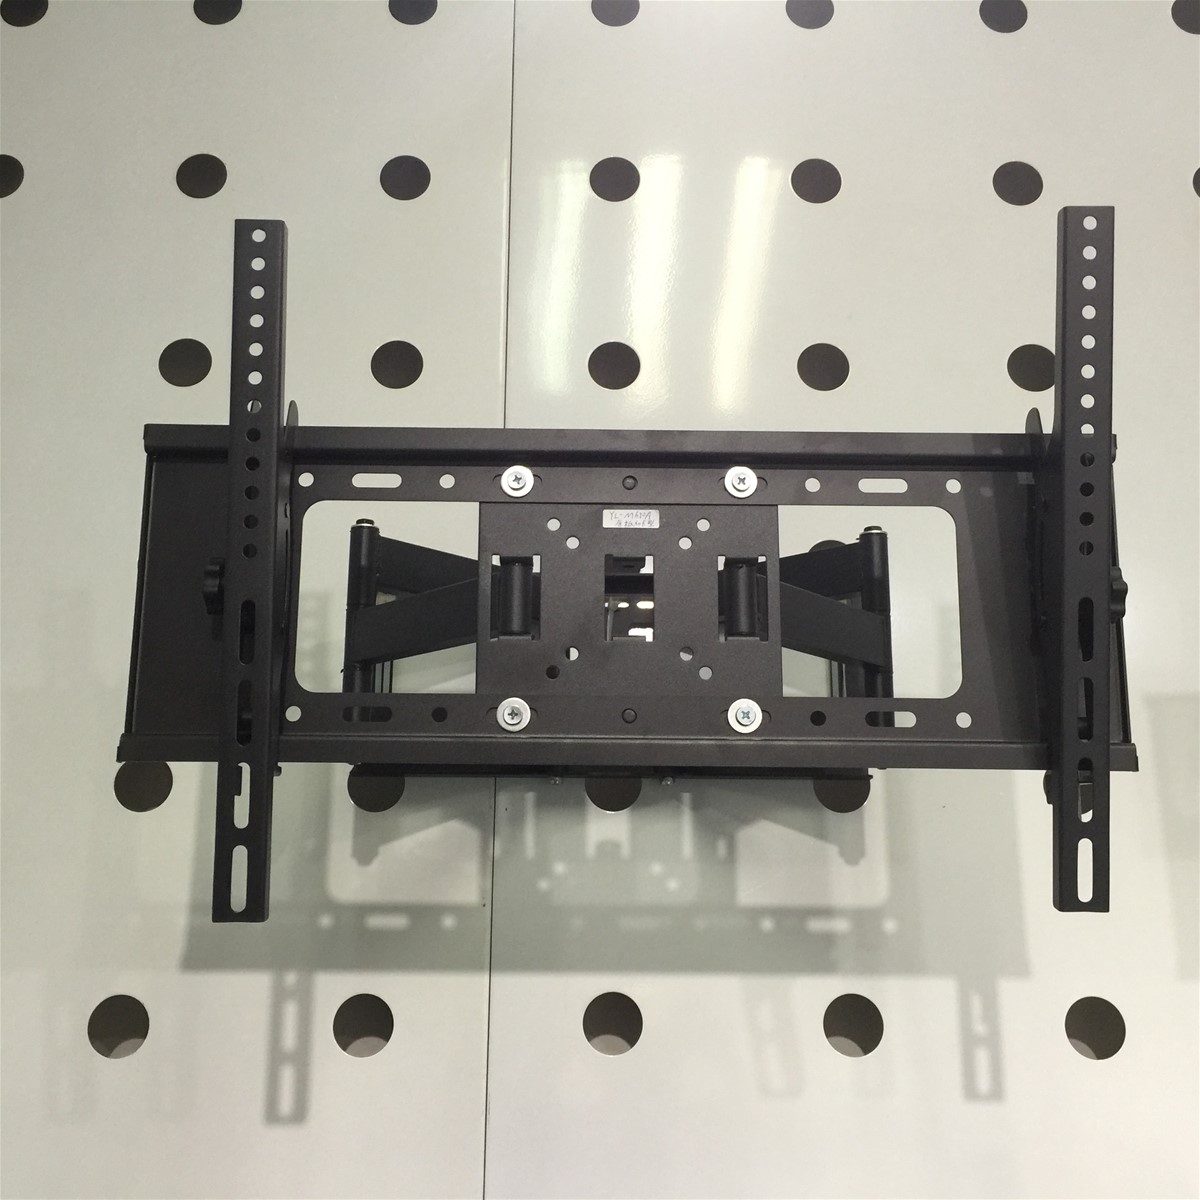 YLG650A multifuntion long tv brackets